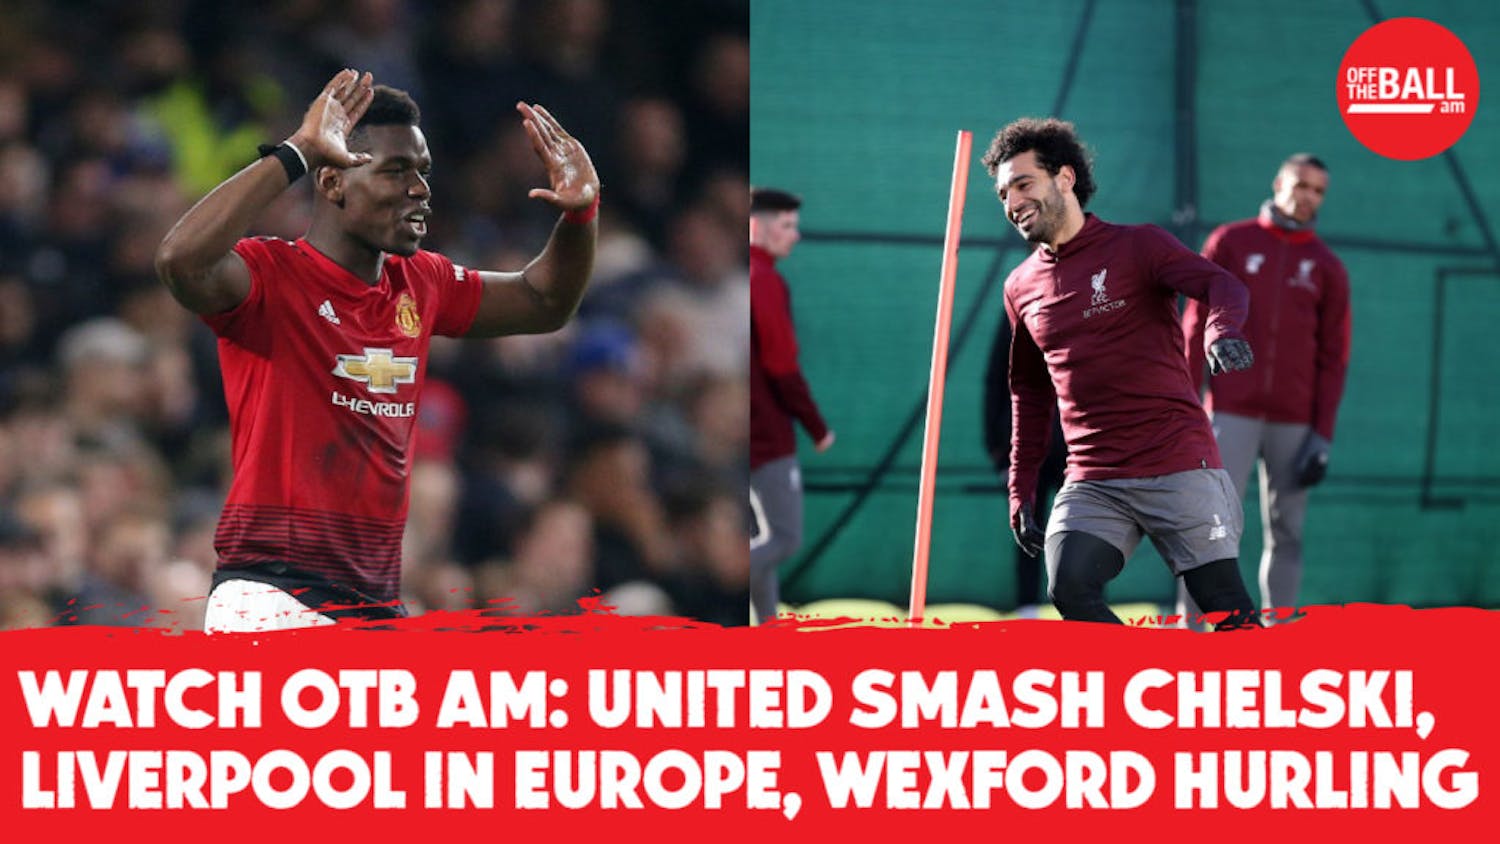 Super Pogba, Liverpool-Bayern, Darby and Tyrell, Wexford